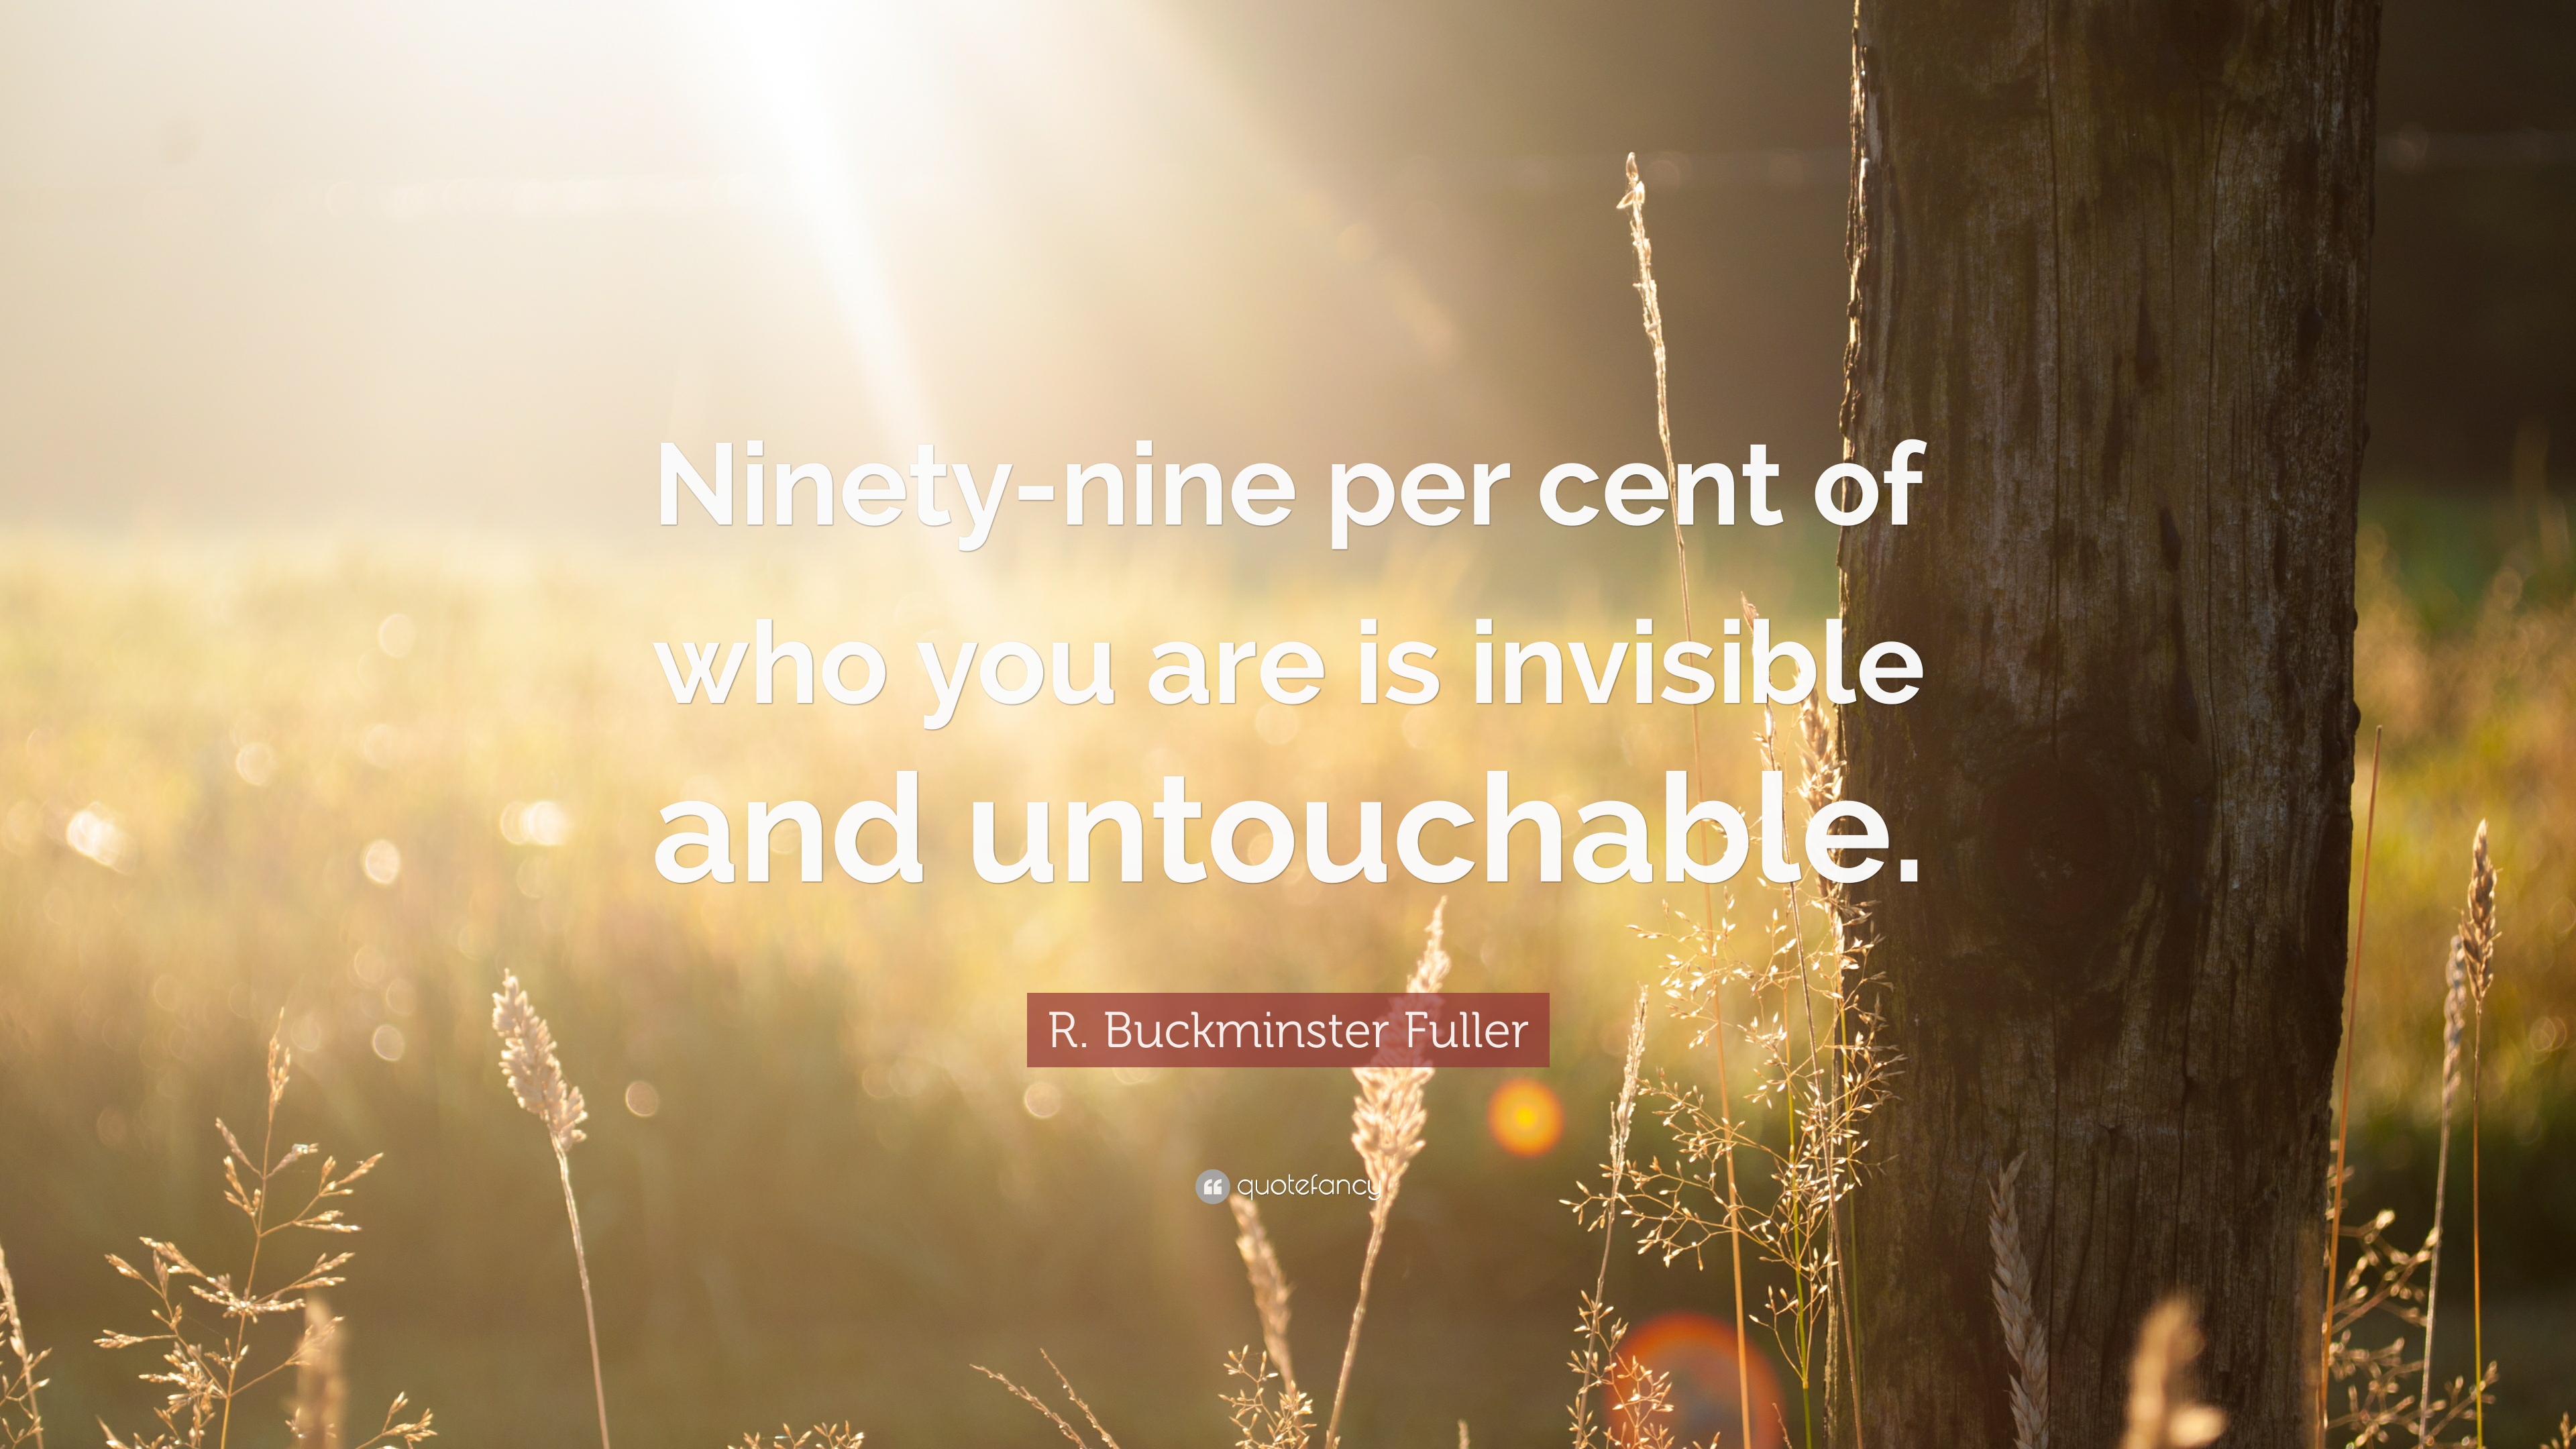 276316-r-buckminster-fuller-quote-ninety-nine-per-cent-of-who-you-are-is